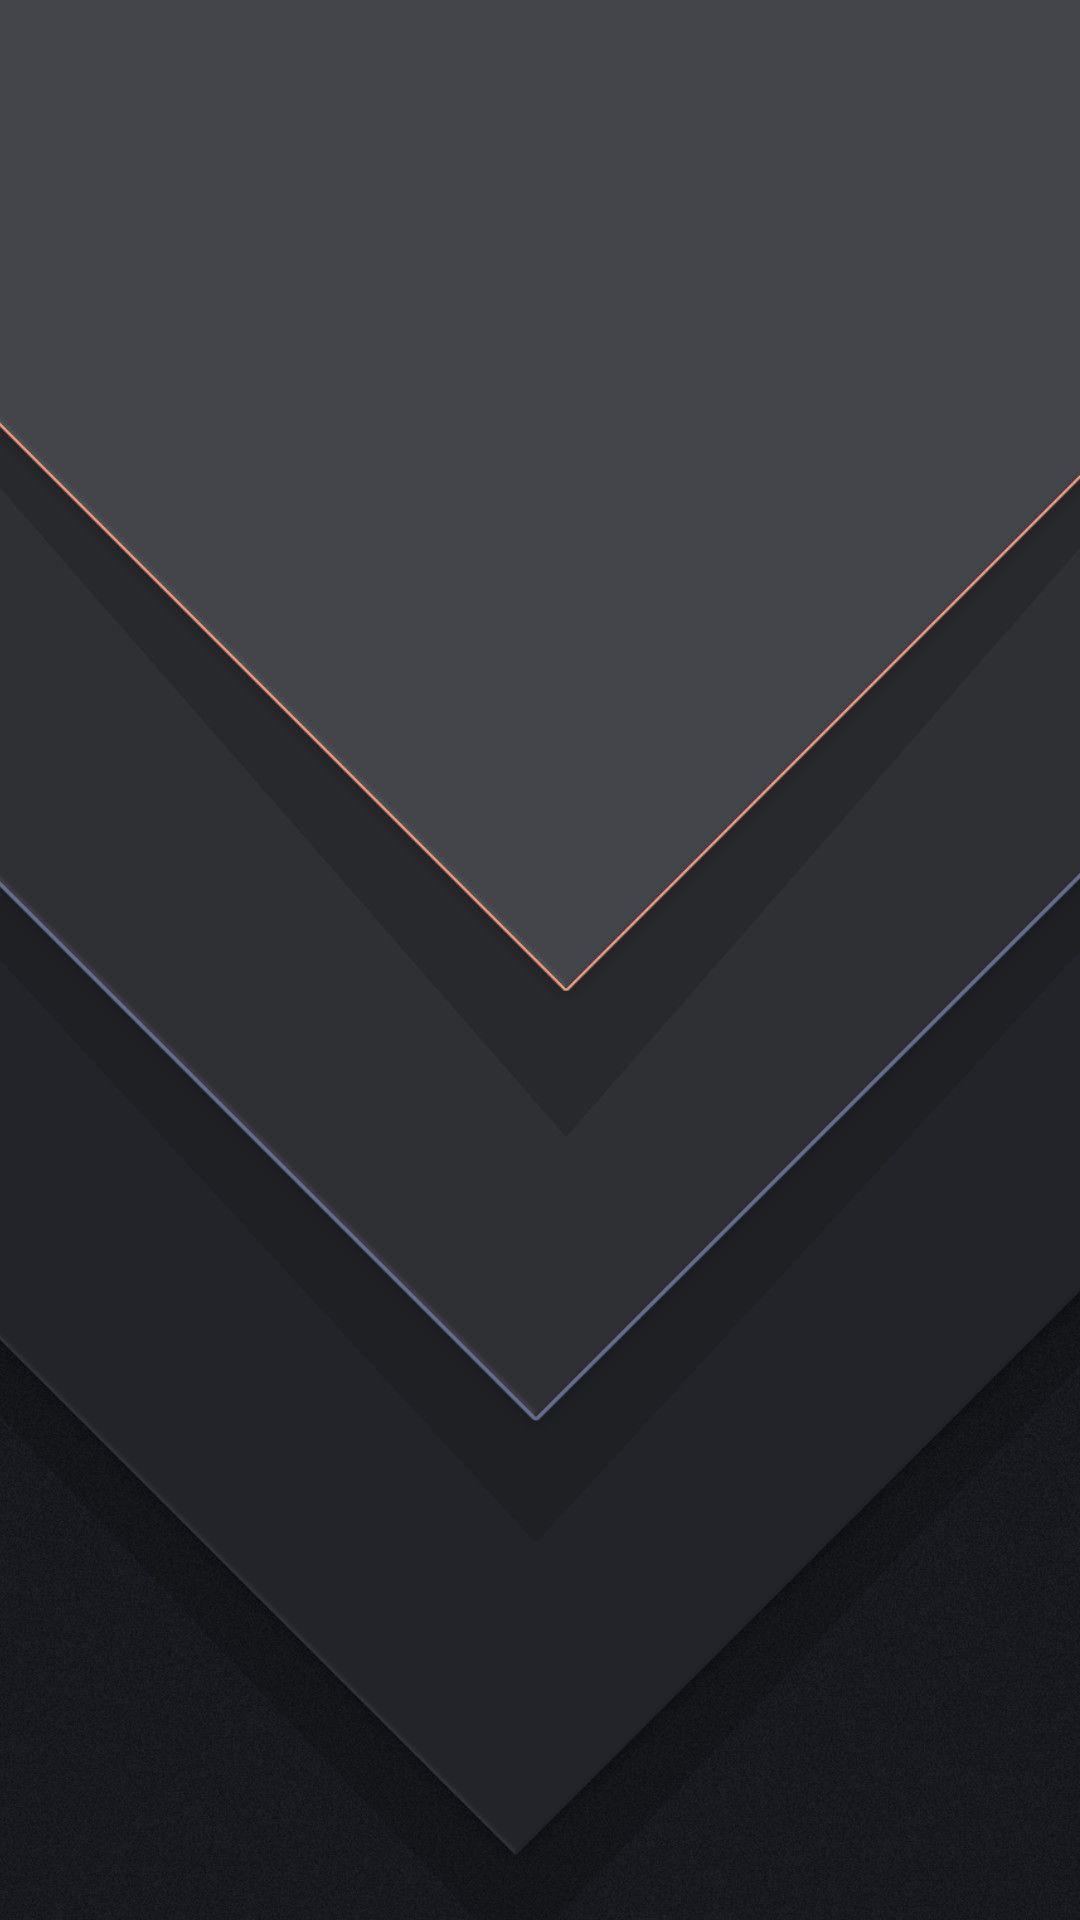 Black Android Wallpaper Free Black Android Background